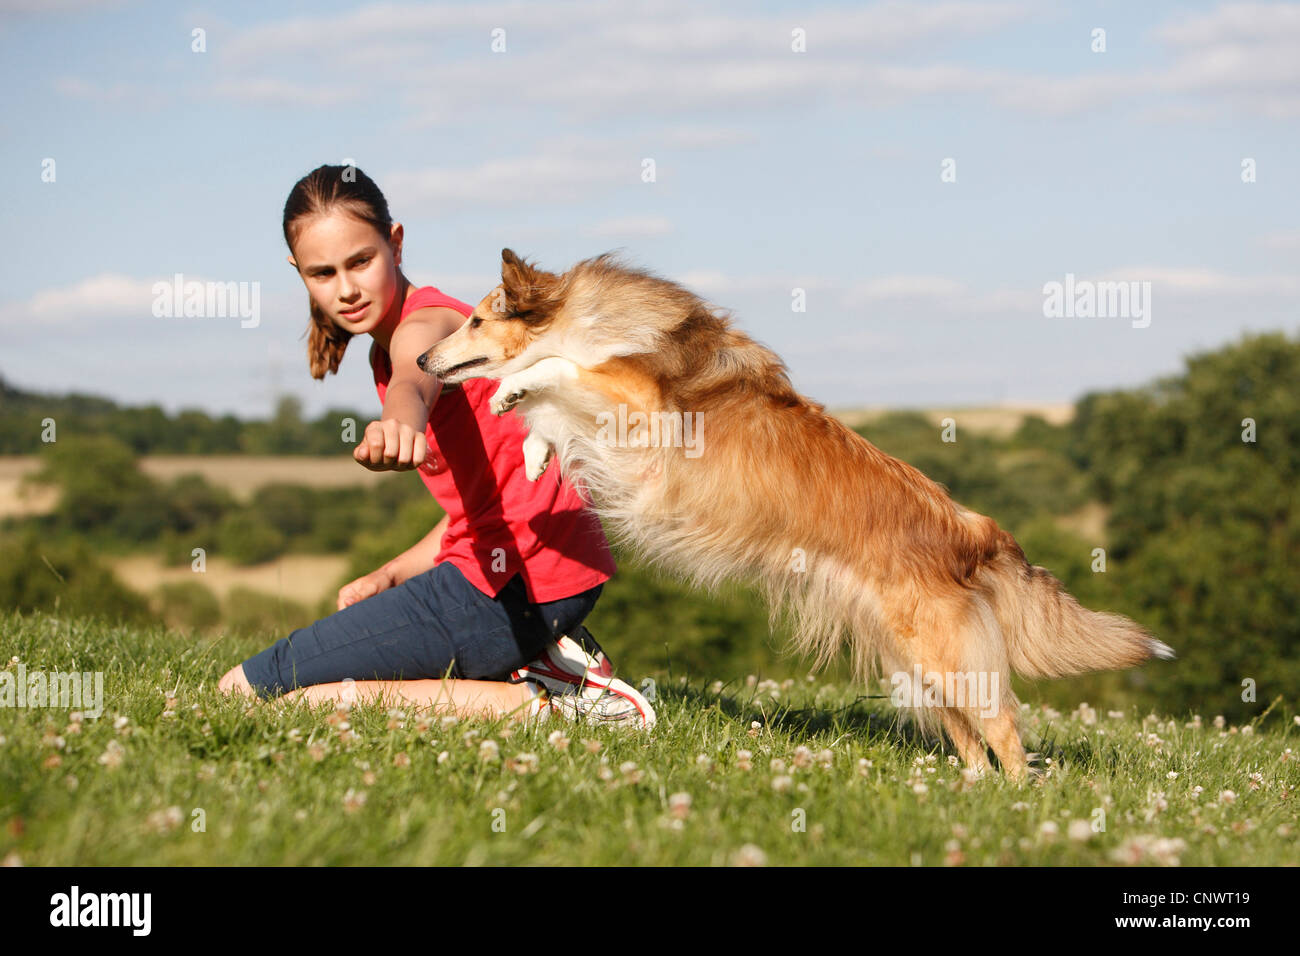 Shetland Sheepdog (Canis lupus f. familiaris), eight years old dog jumping over an arm of a girl, NOT AVAILABLE FOR USE AS BOOK COVERS, Germany Stock Photo